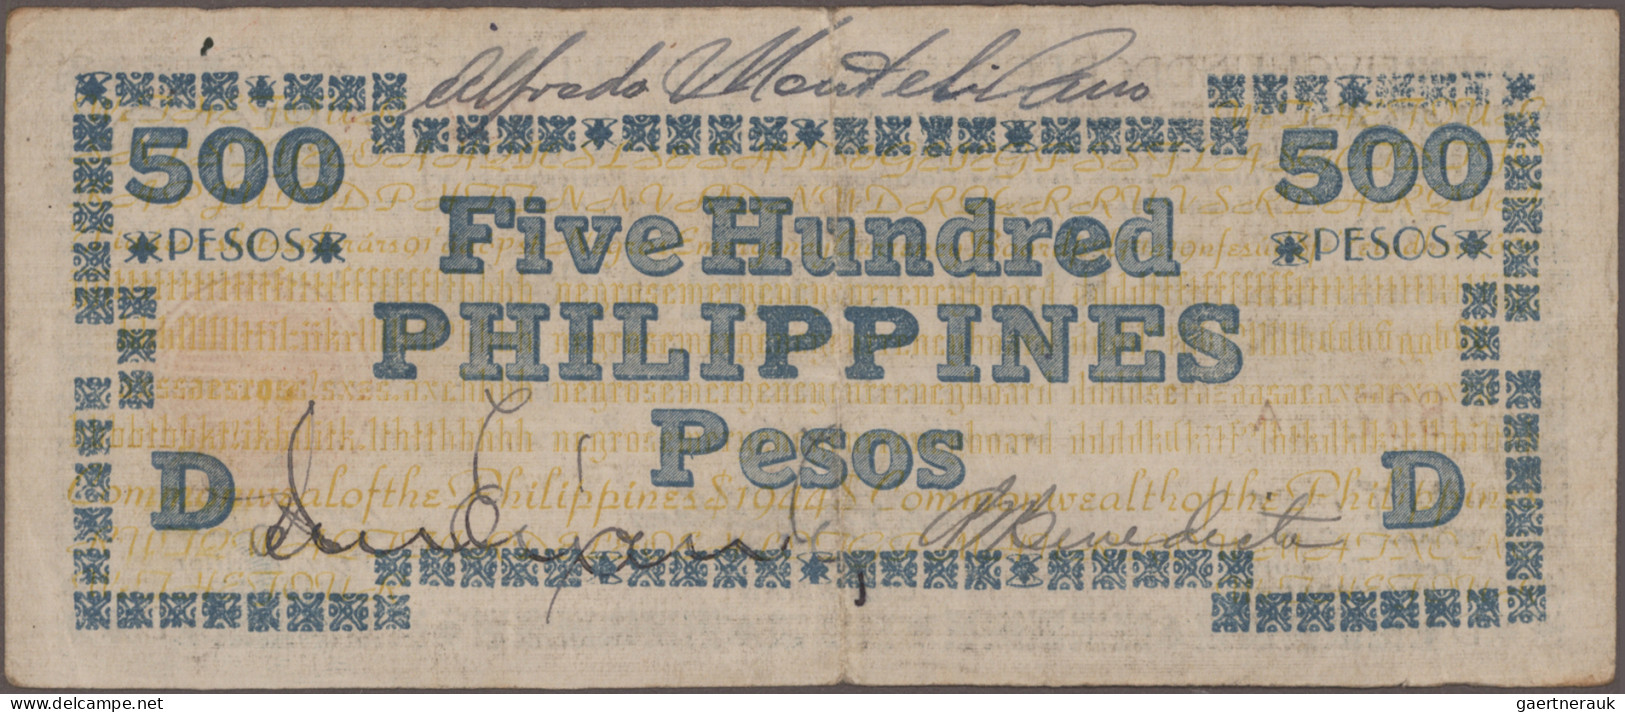 Philippines: Collectors album with 132 banknotes Emergency Issues WWII, series 1